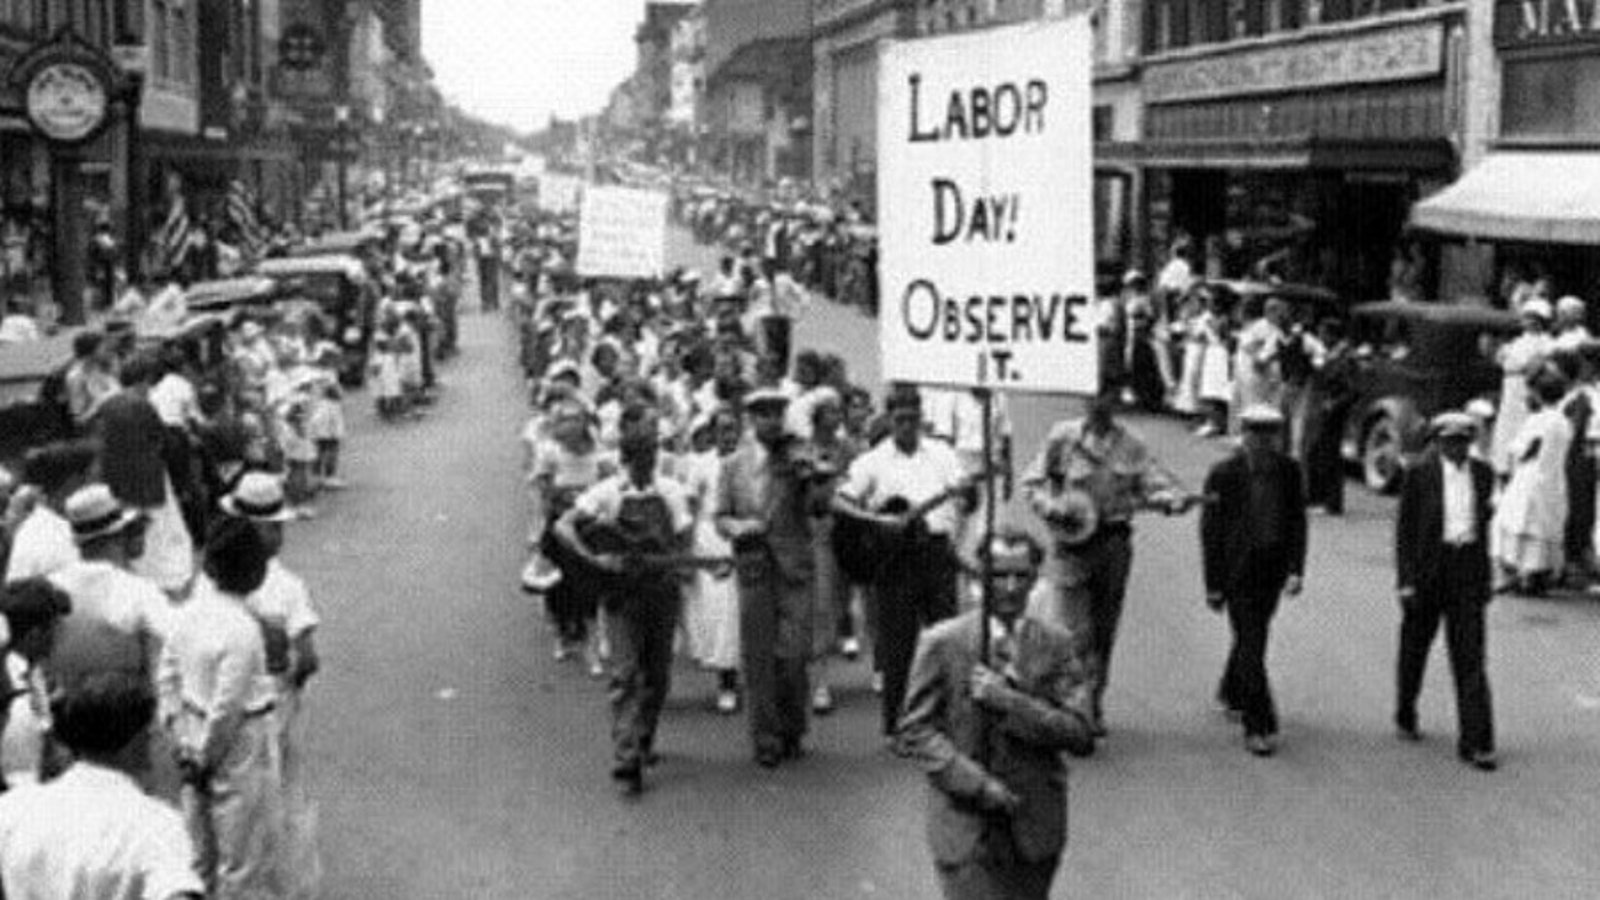 The Uprising of '34 - The Southern Cotton Mill Strike of 1934